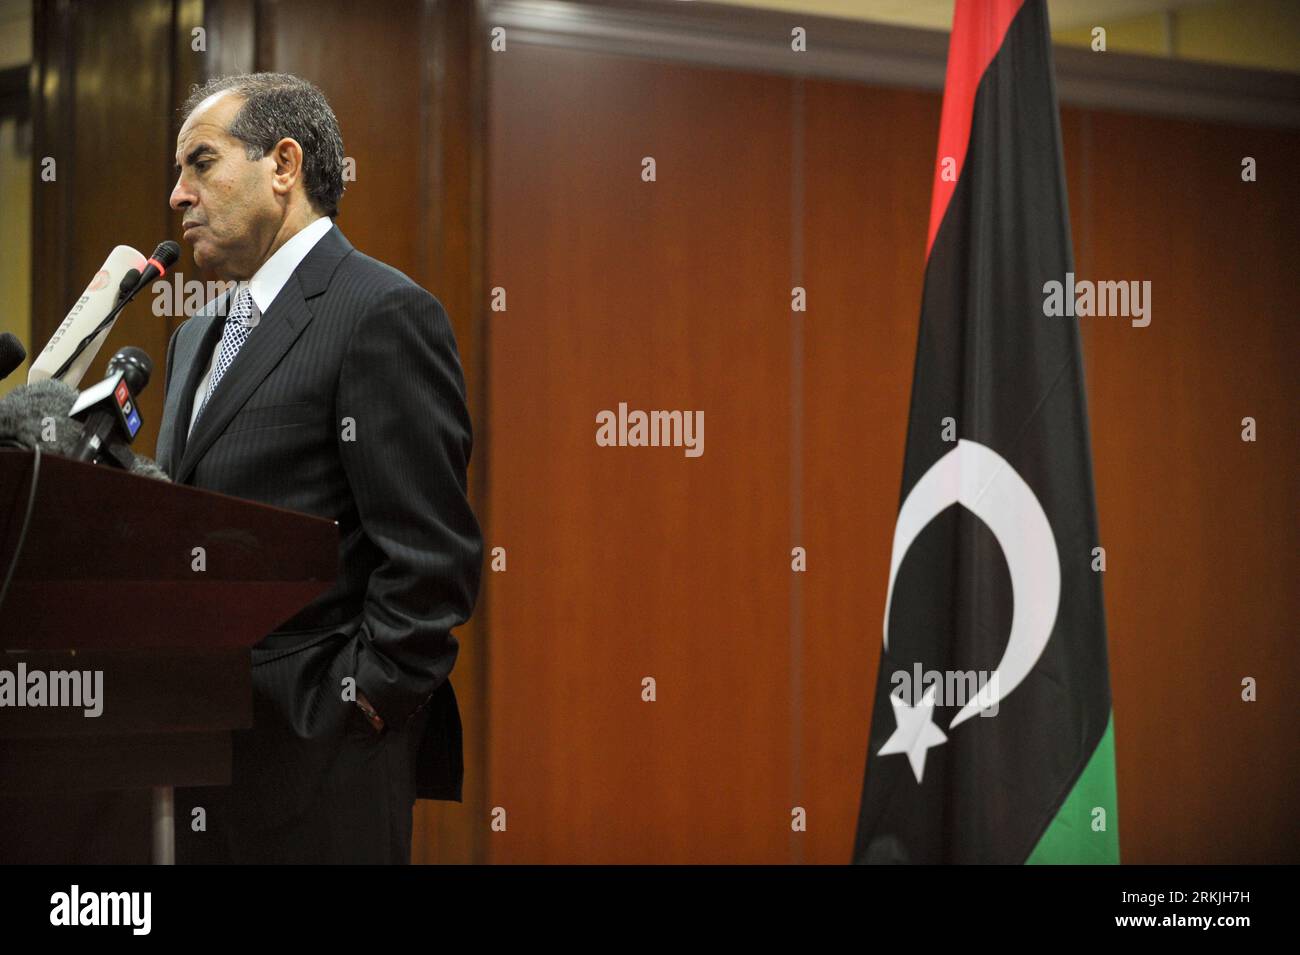 Bildnummer: 56136872  Datum: 29.09.2011  Copyright: imago/Xinhua (110929) -- TRIPOLI, Sept. 29, 2011 (Xinhua) -- Mahmoud Jibril, chairman of the executive office of Libya s National Transitional Council (NTC), speaks during a press conference in Tripoli, Libya, Sept. 29, 2011. The ruling authorities will postpone the formation of an interim government until the entire Libya is without redoubts of fallen leader, Jibril confirmed here on Thursday. (Xinhua/Li Muzi) LIBYA-TRIPOLI-PRESS CONFERENCE-JIBRIL PUBLICATIONxNOTxINxCHN People Politik premiumd xns x1x 2011 quer     56136872 Date 29 09 2011 C Stock Photo